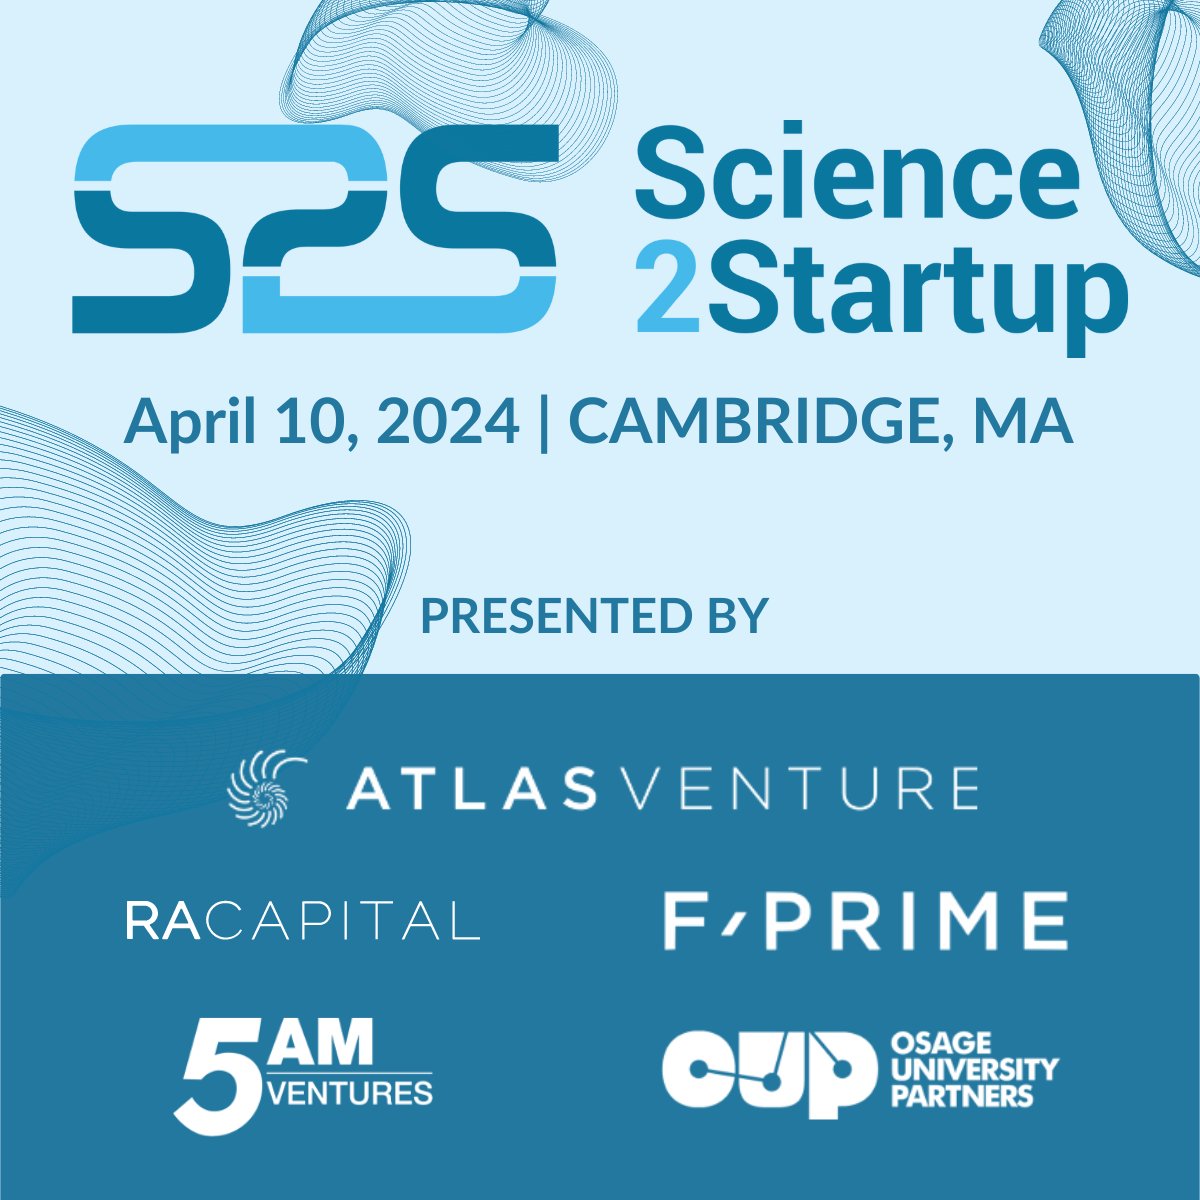 The 4th #Science2Startup takes place this April in Cambridge, hosted by @FPrimeCapital, @atlasventure @5amVentures @OUP_VC, @MassBio, and RA Capital Management. Learn more about this year's event, where world-class scientists connect with top investors: science2startup.com